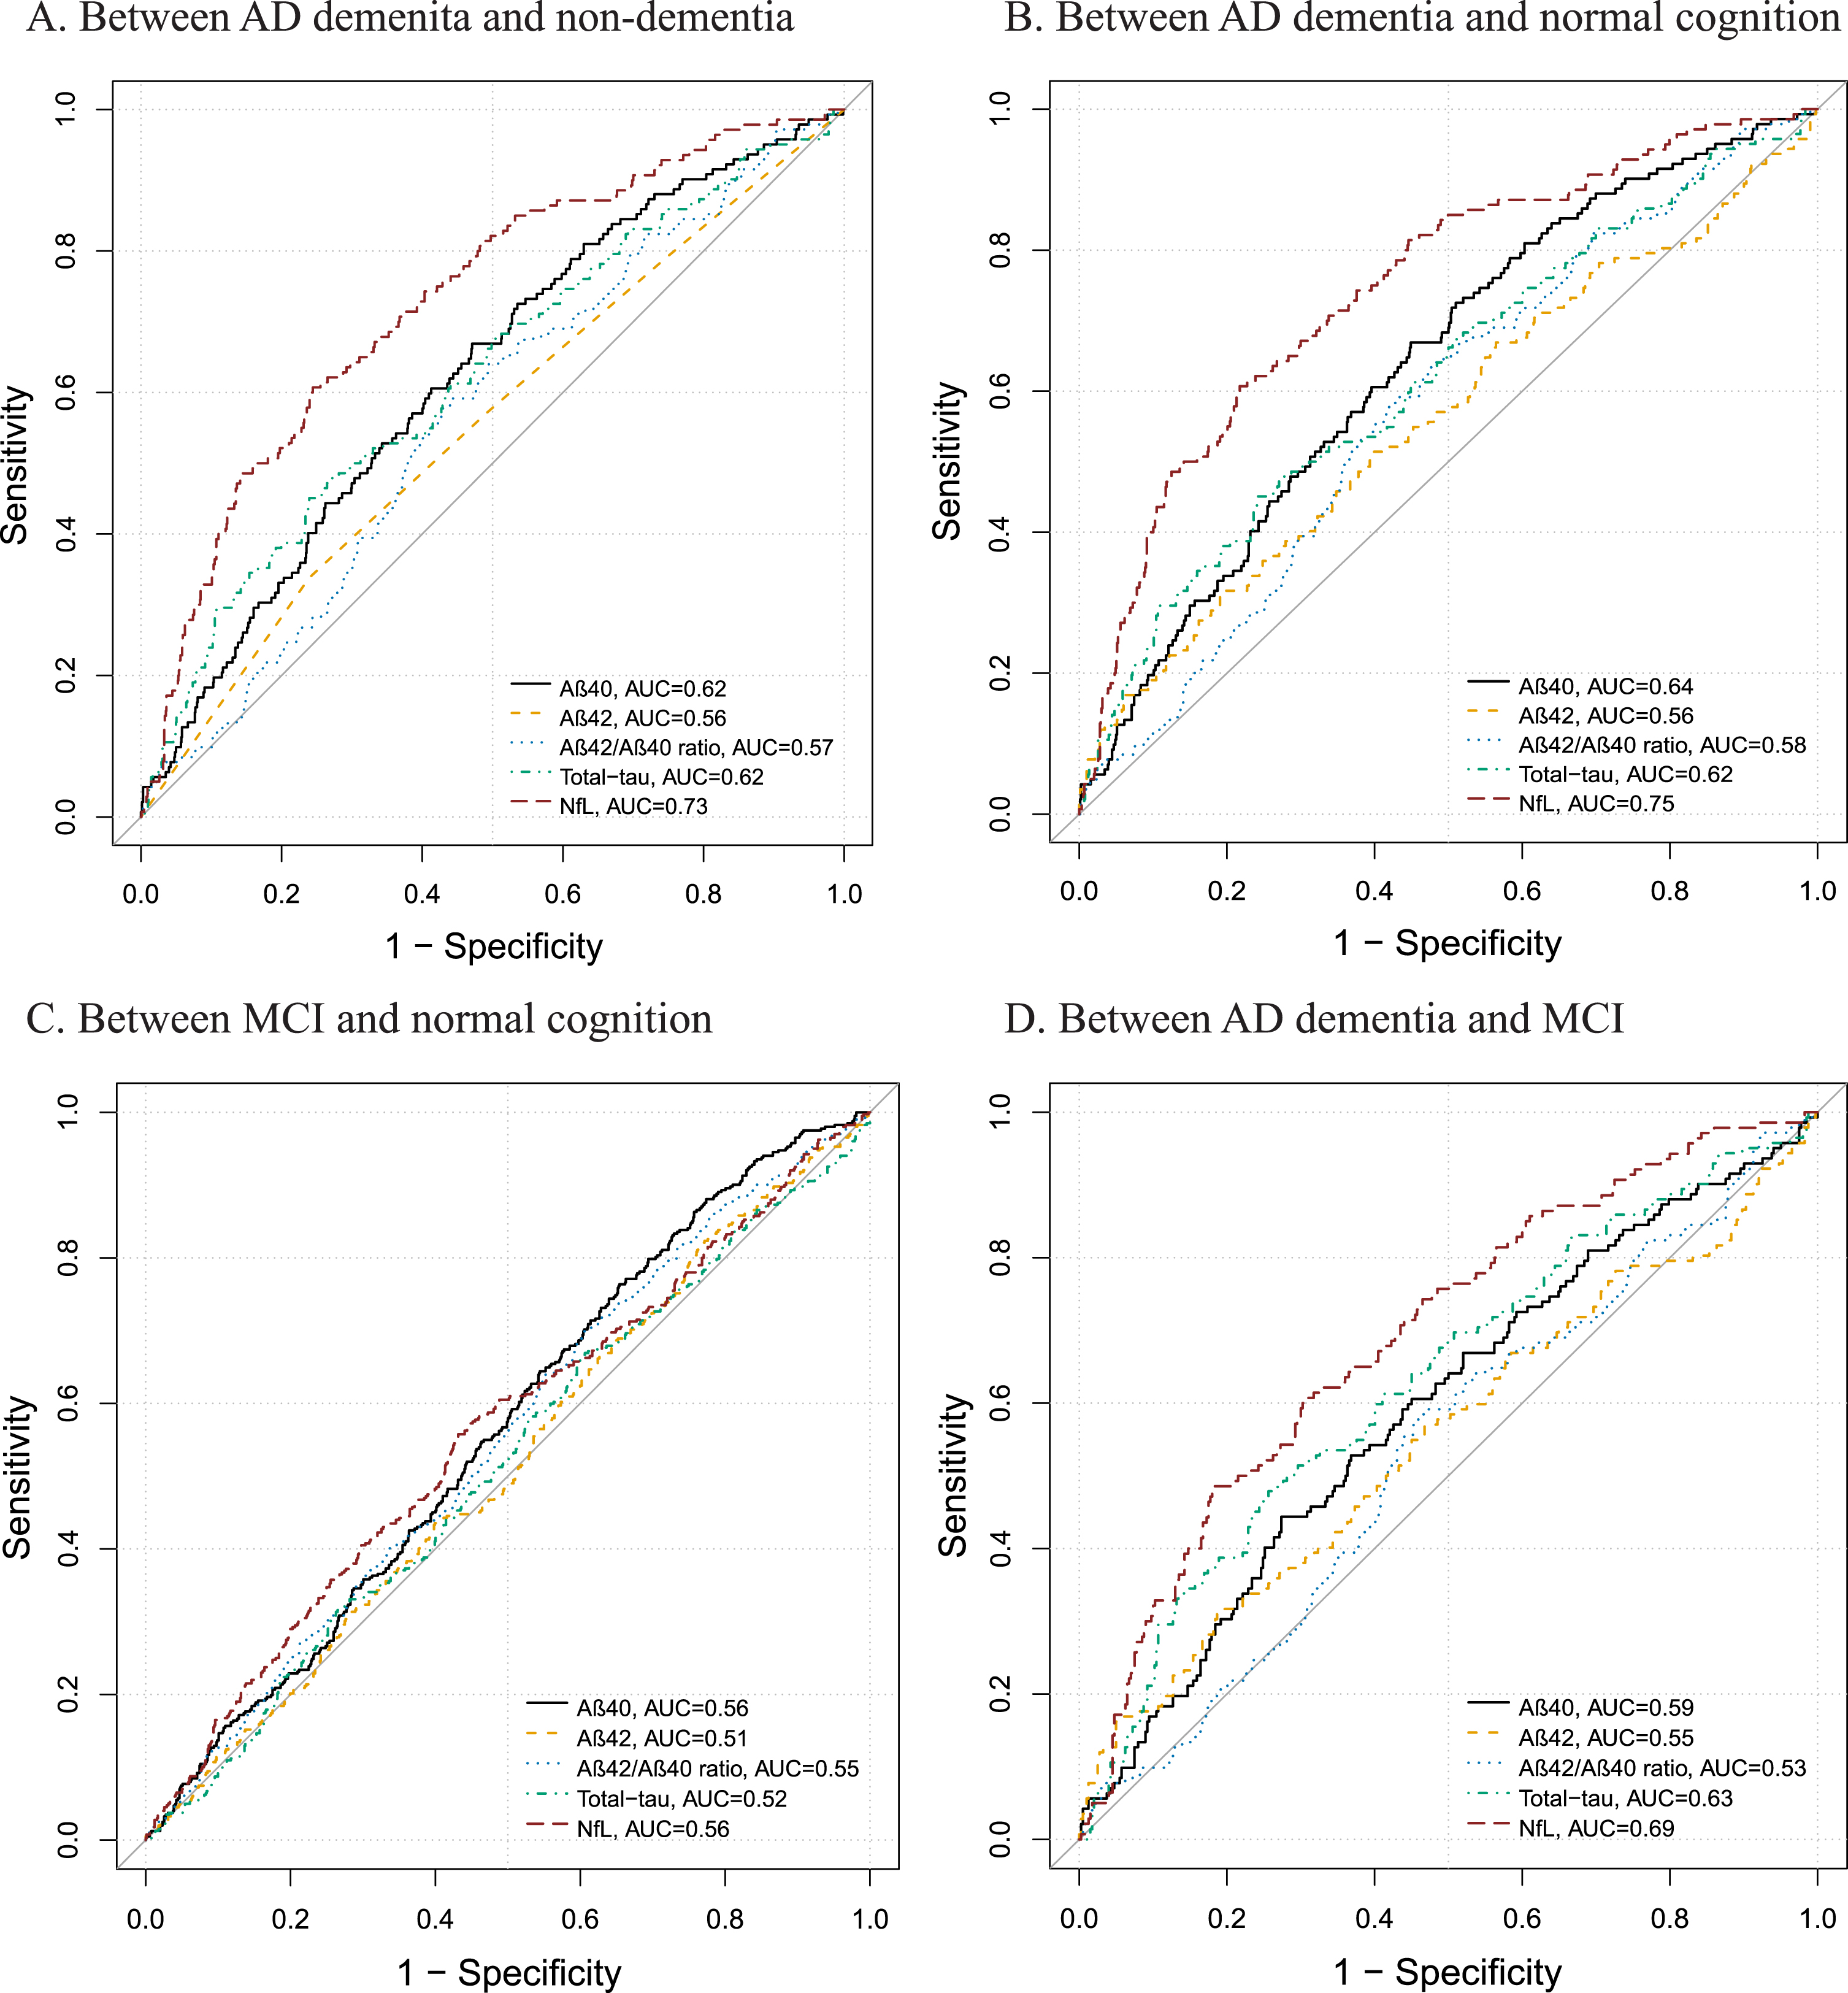 Discriminative performance of plasma biomarkers across diagnostic groups. Receiver-operating characteristics curves displaying the performance of plasma Aβ40, Aβ42, Aβ42/Aβ40 ratio, total-tau, and NfL to distinguish (A) between AD dementia and non-dementia; (B) between AD dementia and normal cognition, (C) between MCI and normal cognition, and (D) between AD dementia and MCI. MCI, mild cognitive impairment; AD, Alzheimer’s disease; Aβ, amyloid-β; NfL, neurofilament light chain; AUC, areas under the receiver operating characteristics curve.